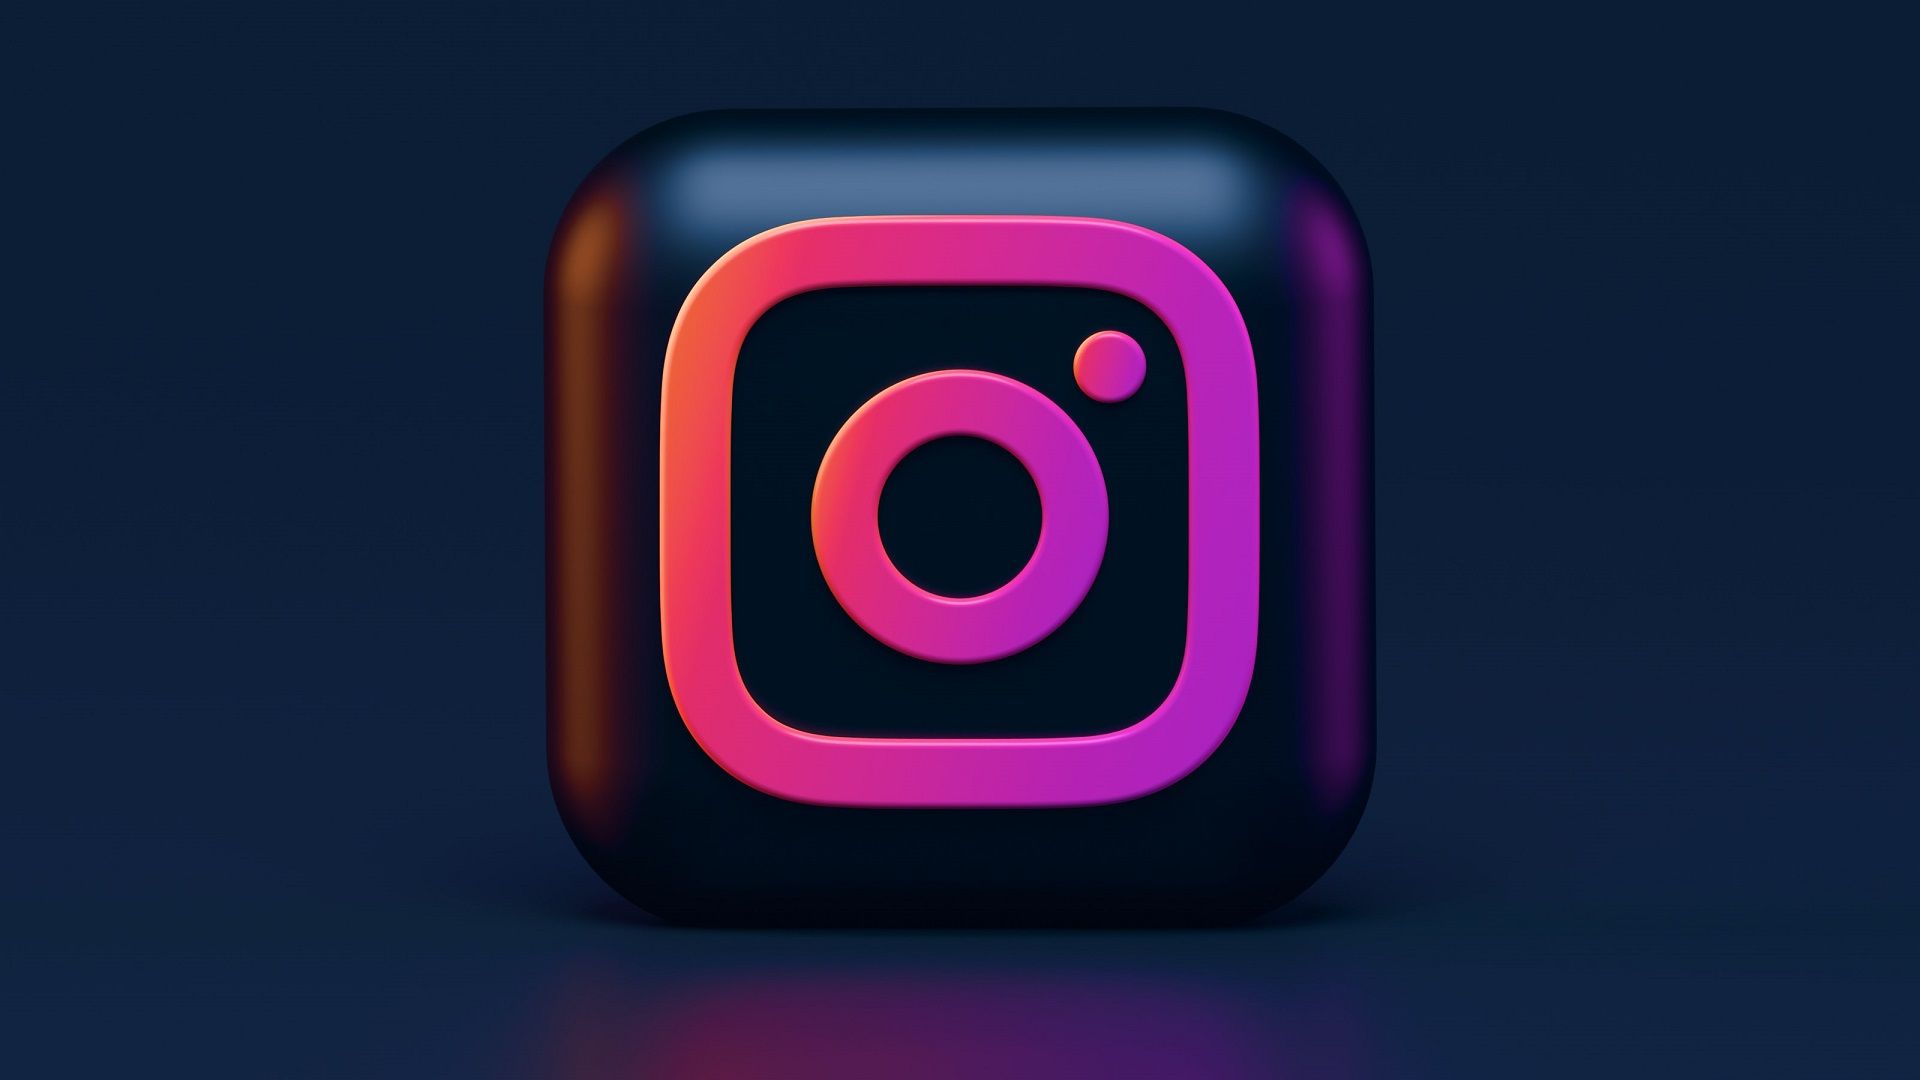 Instagram Dynamic Profile Photo: How to make your Insta avatar and